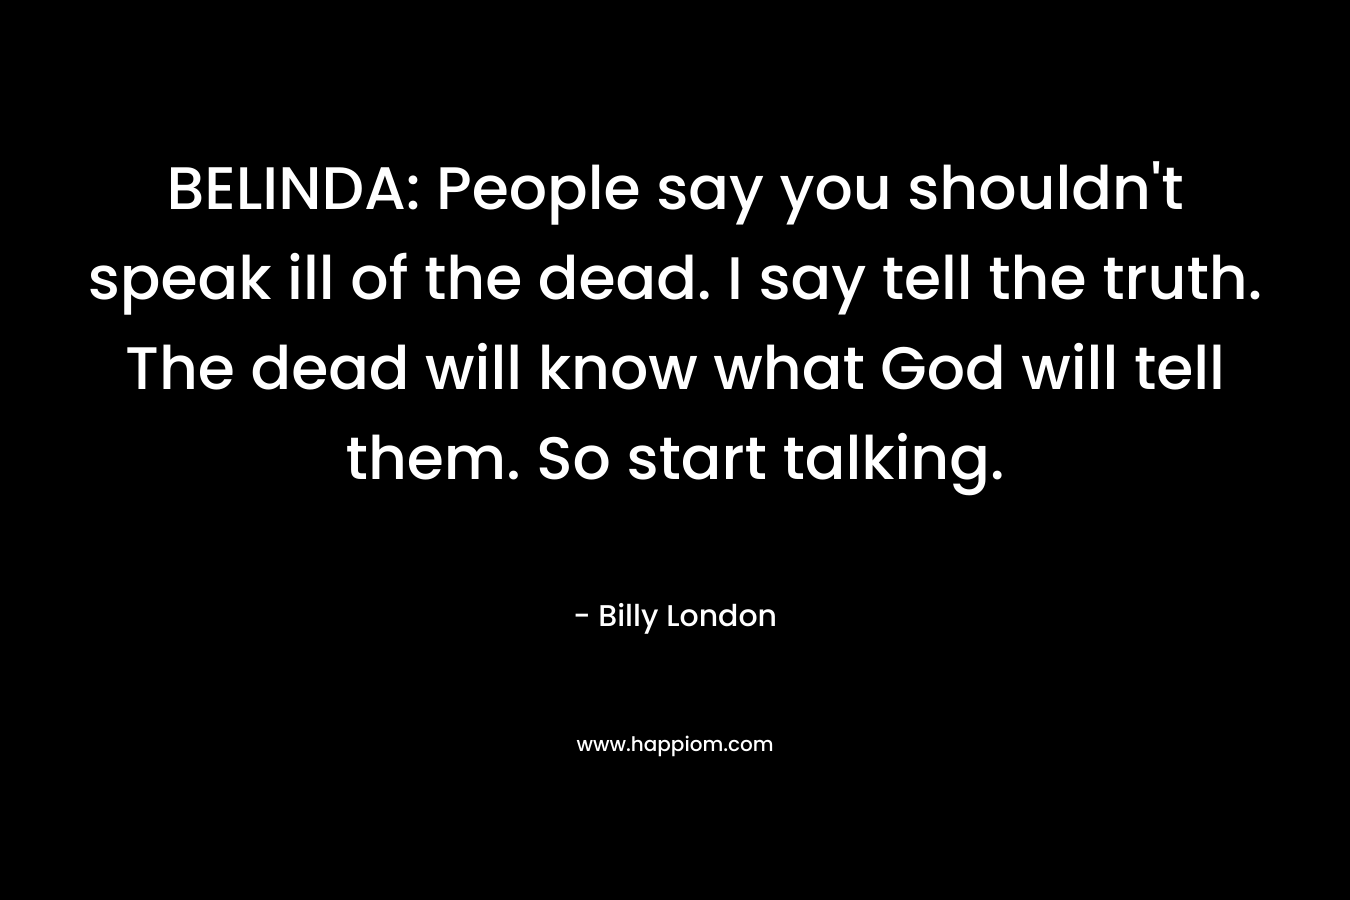 BELINDA: People say you shouldn't speak ill of the dead. I say tell the truth. The dead will know what God will tell them. So start talking.